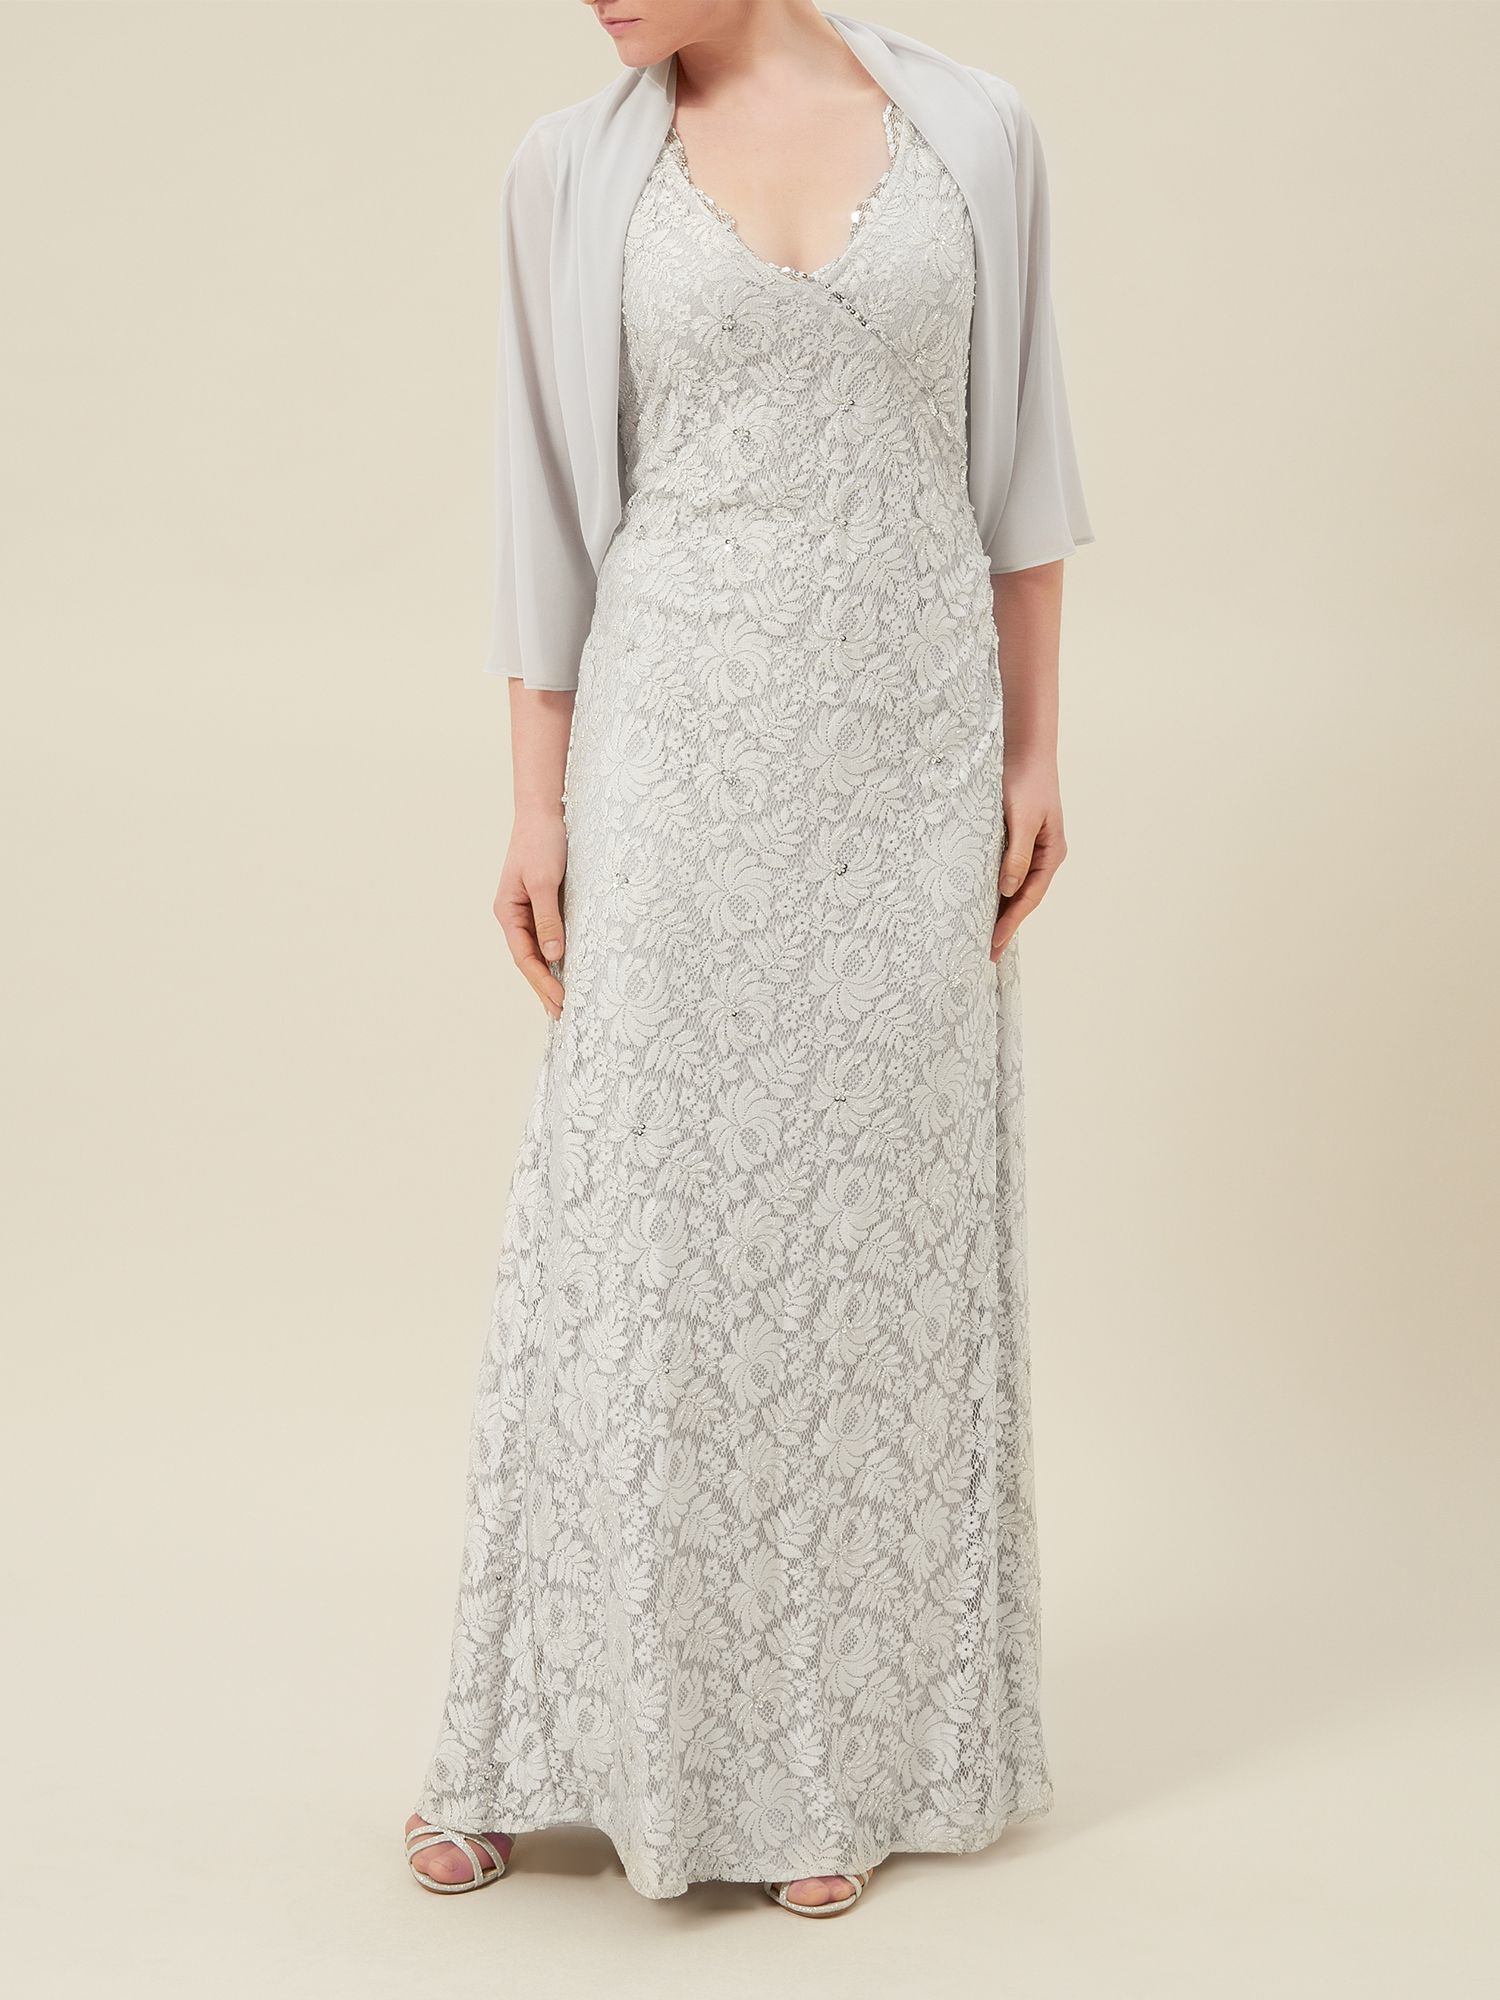 Jacques vert Lace Evening Dress in Gray | Lyst